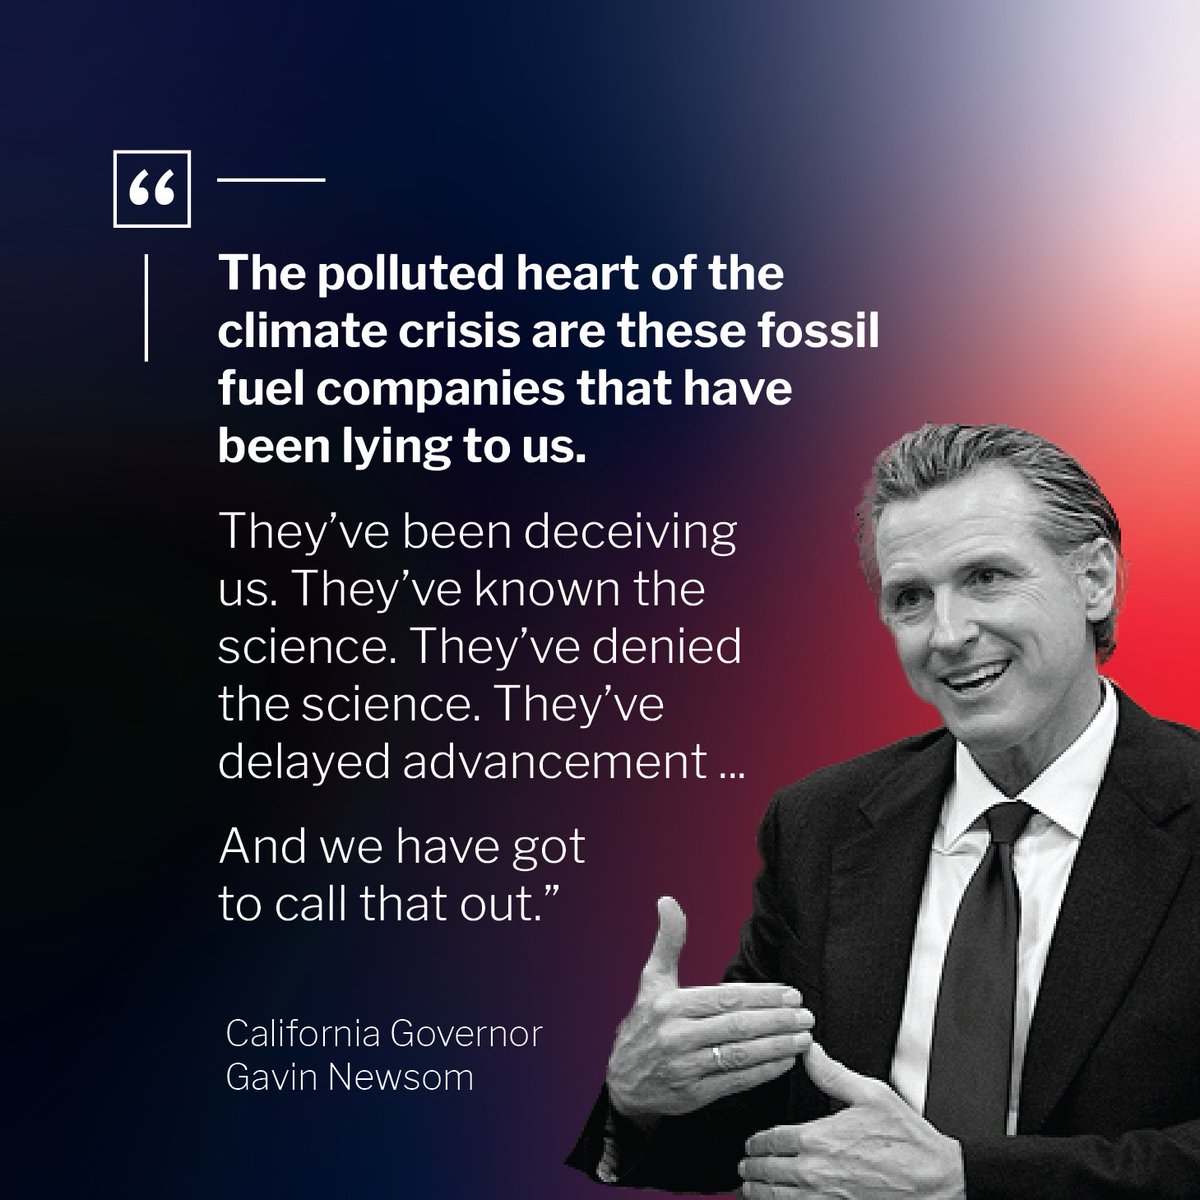 At last week's Vatican Climate Summit, @GavinNewsom rightfully called out fossil fuel companies for spreading climate lies for decades. California is fighting in court to hold Big Oil accountable for the industry's ongoing deception.